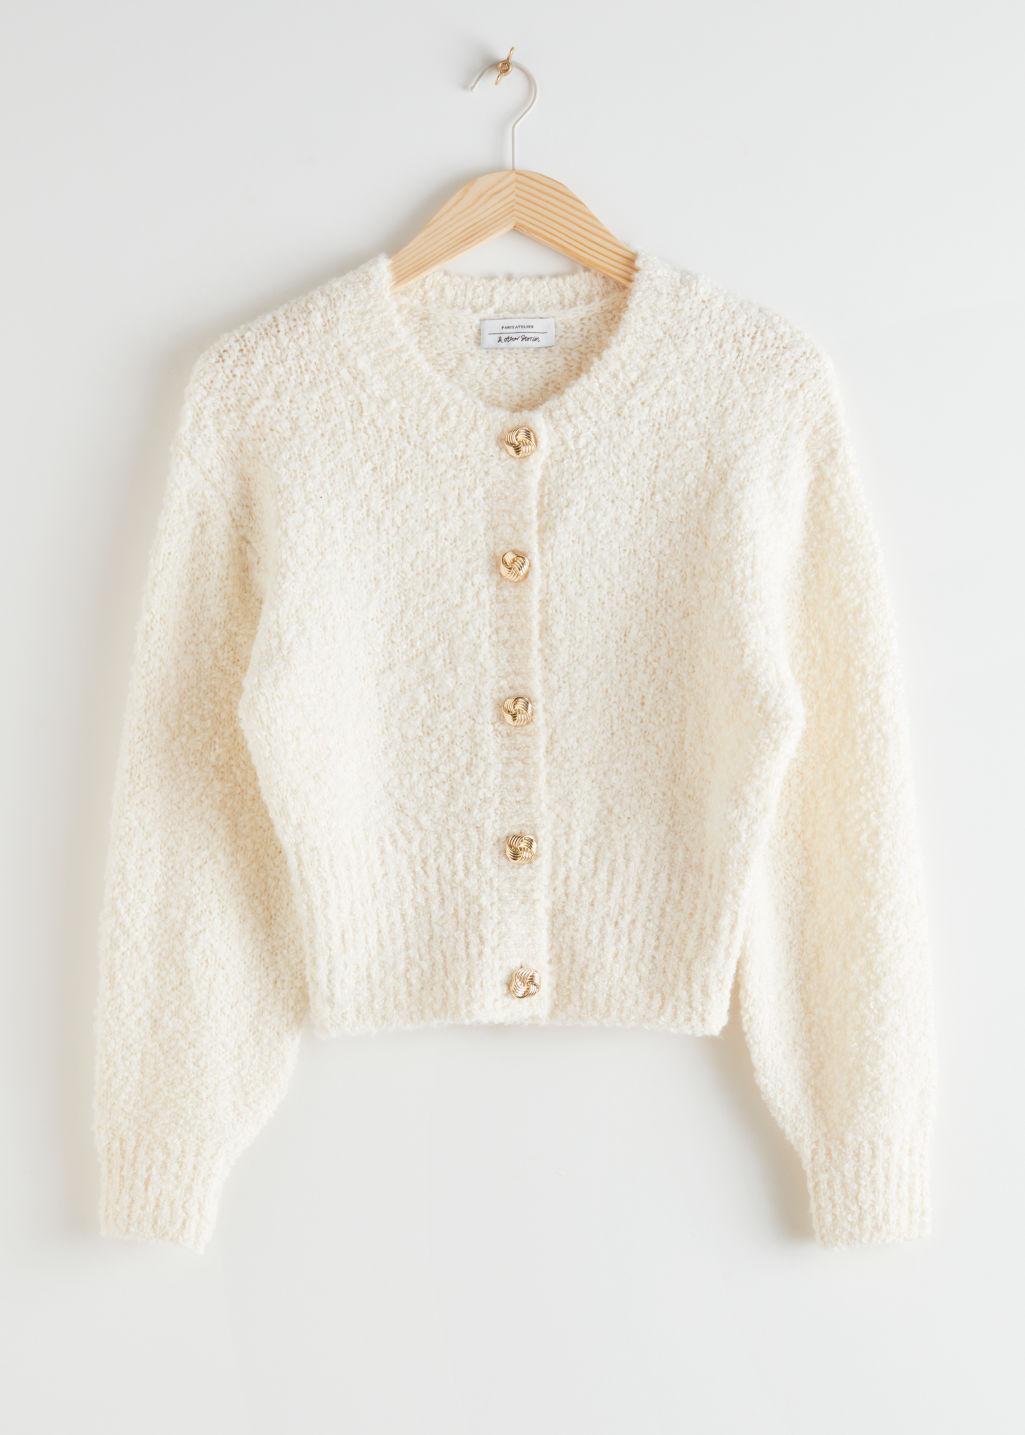 & Other Stories Bouclé Knit Cropped Cardigan in White | Lyst